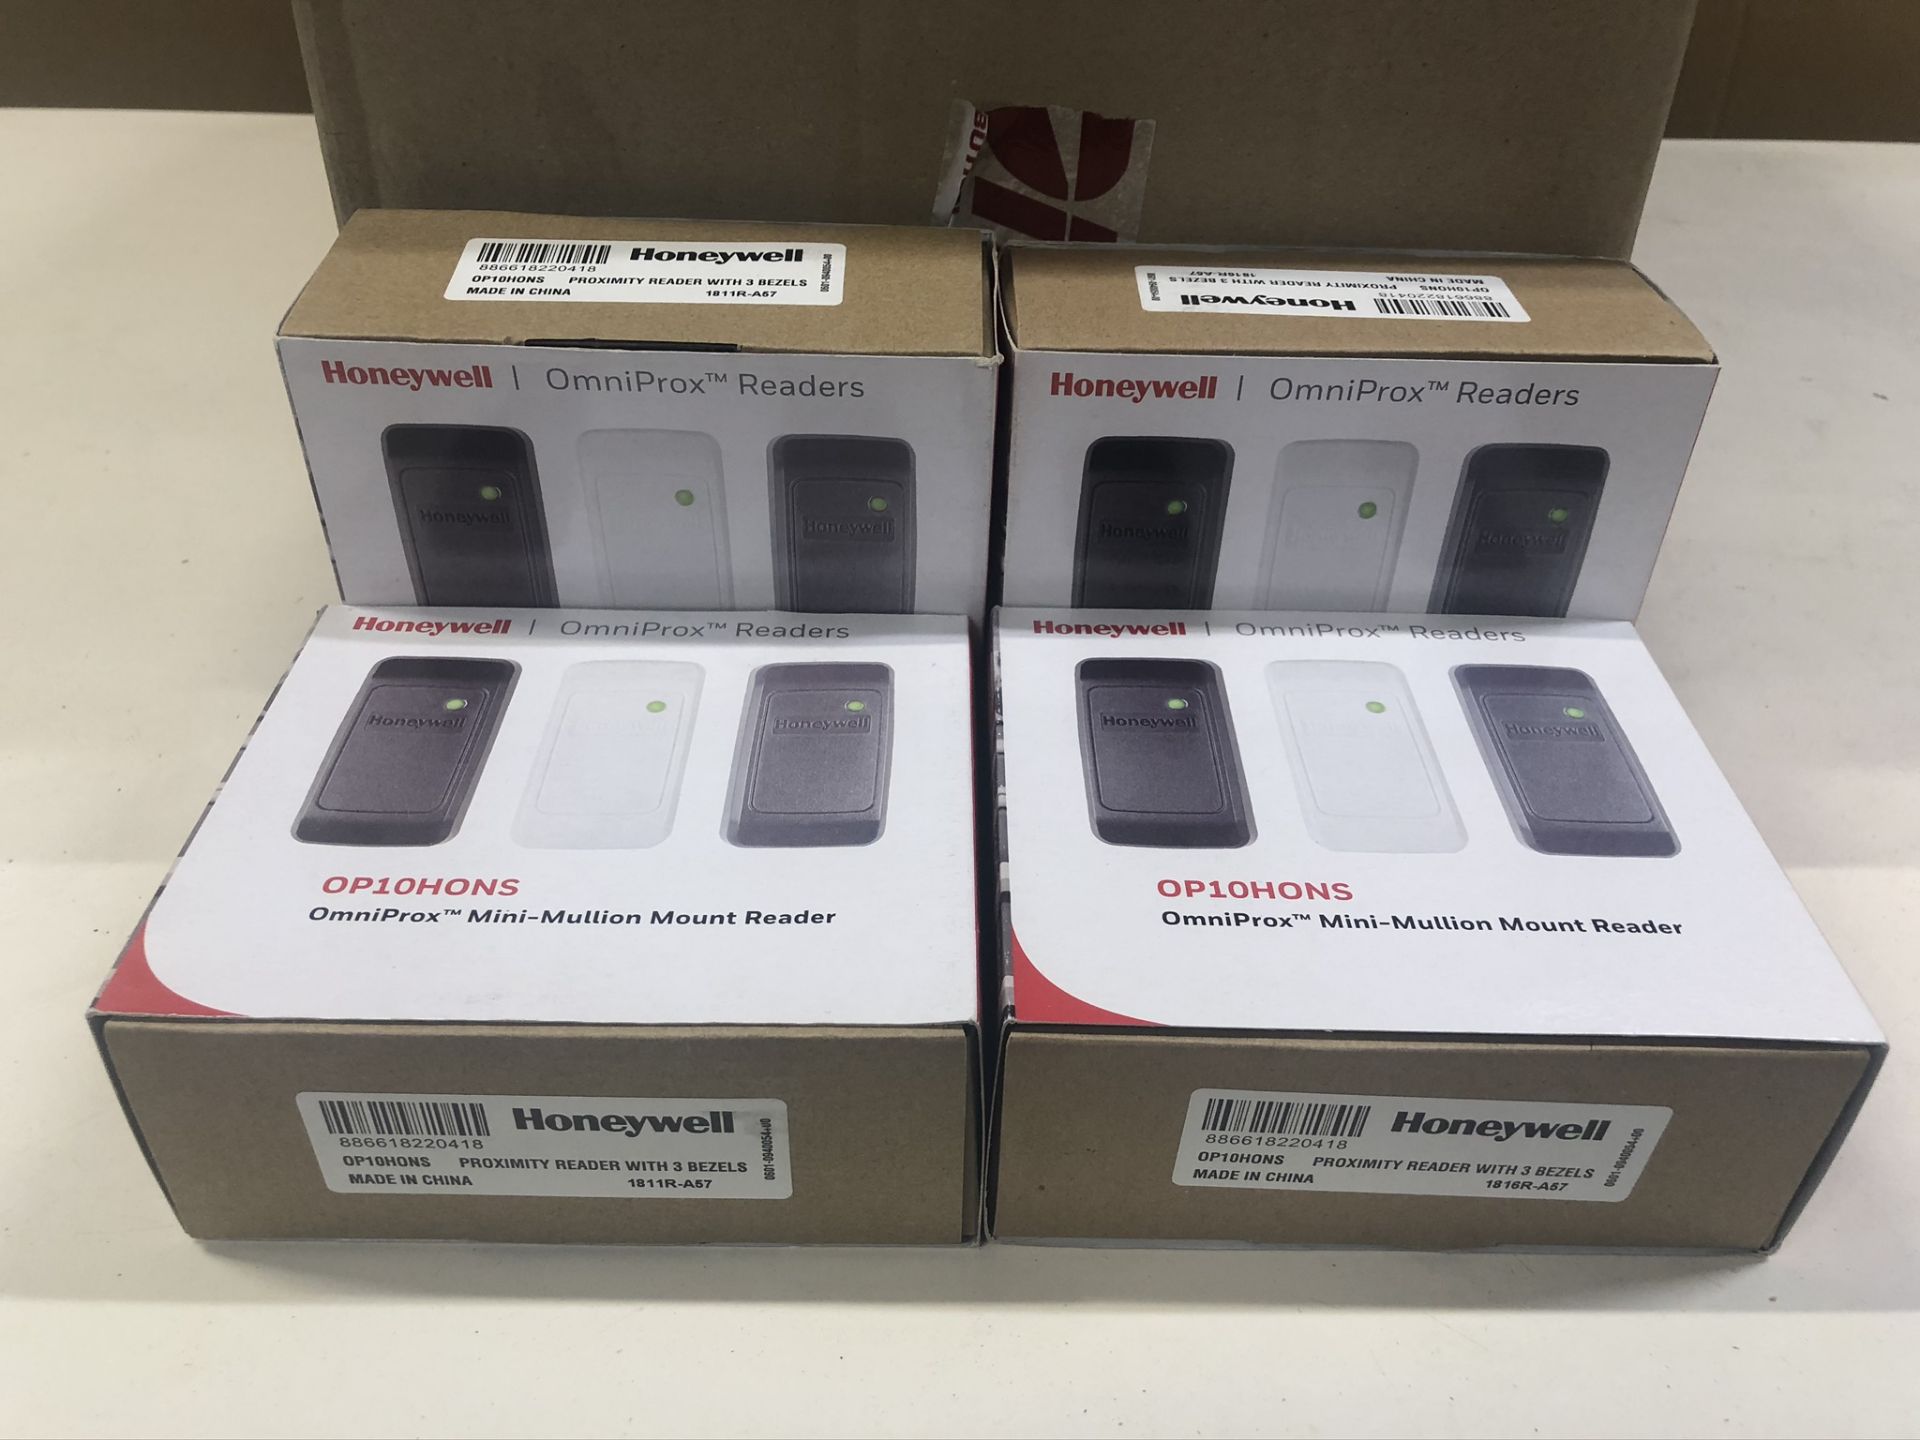 22 x Honeywell OP10HONS OmniProx Access Control Readers - Image 2 of 3